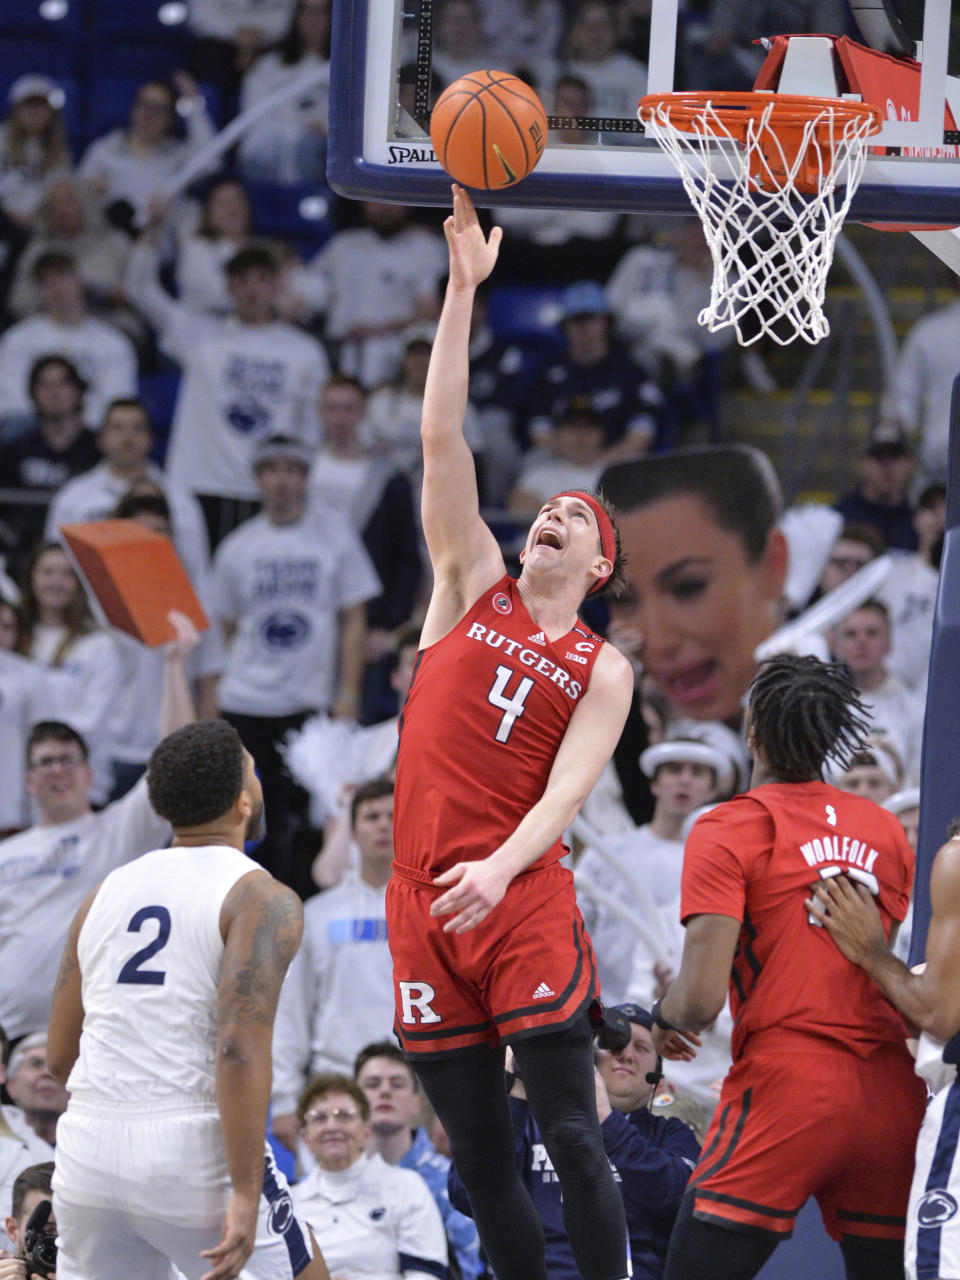 Rutgers' Paul Mulcahy (4) scores on a reverse layup during the first half of an NCAA college basketball game against Penn State, Sunday, Feb. 26, 2023, in State College, Pa. (AP Photo/Gary M. Baranec)